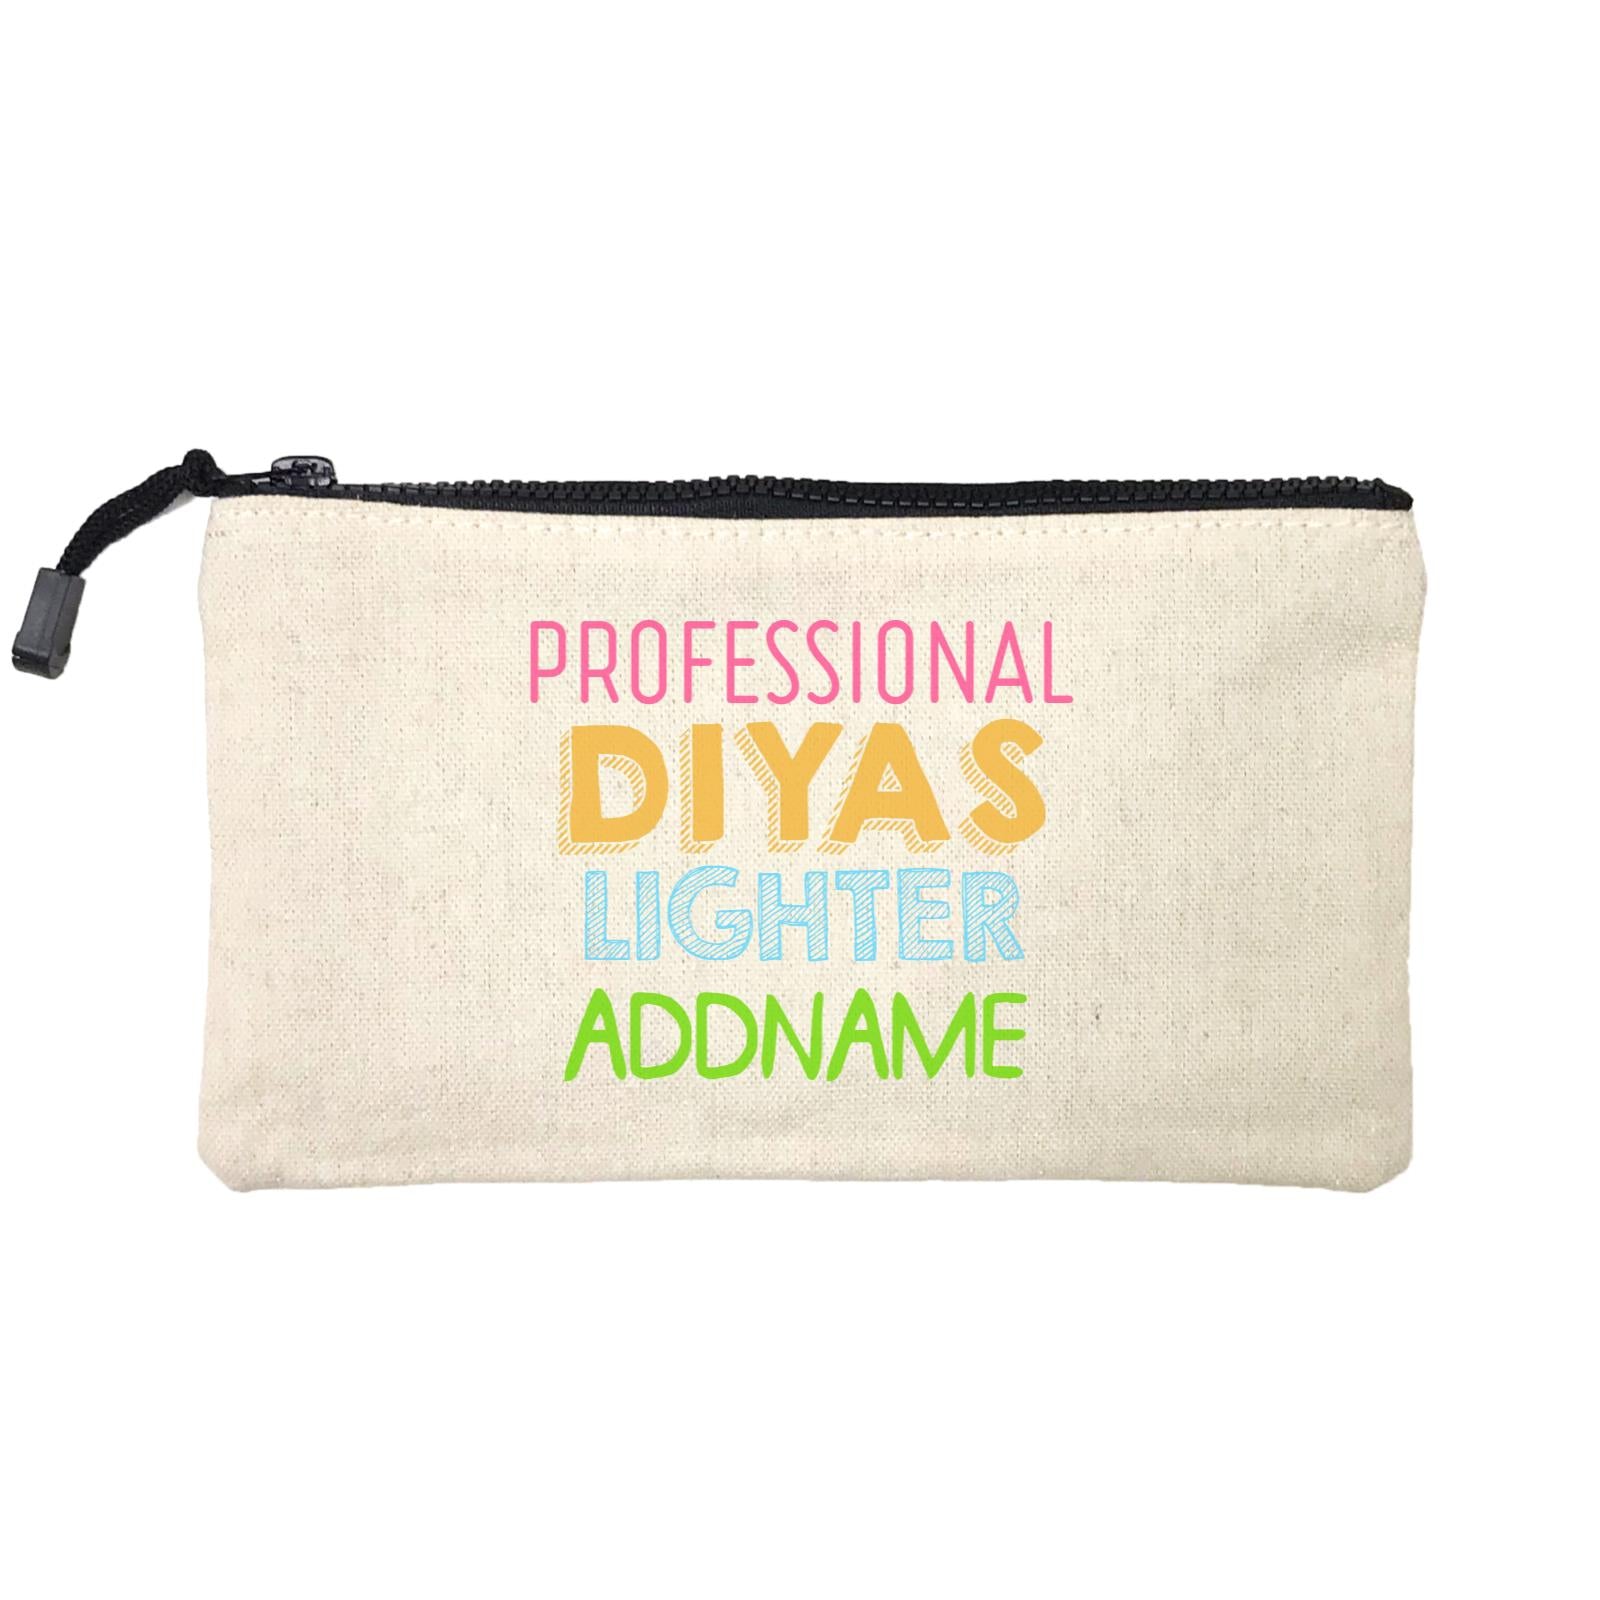 Professional Diyas Lighter Addname Mini Accessories Stationery Pouch